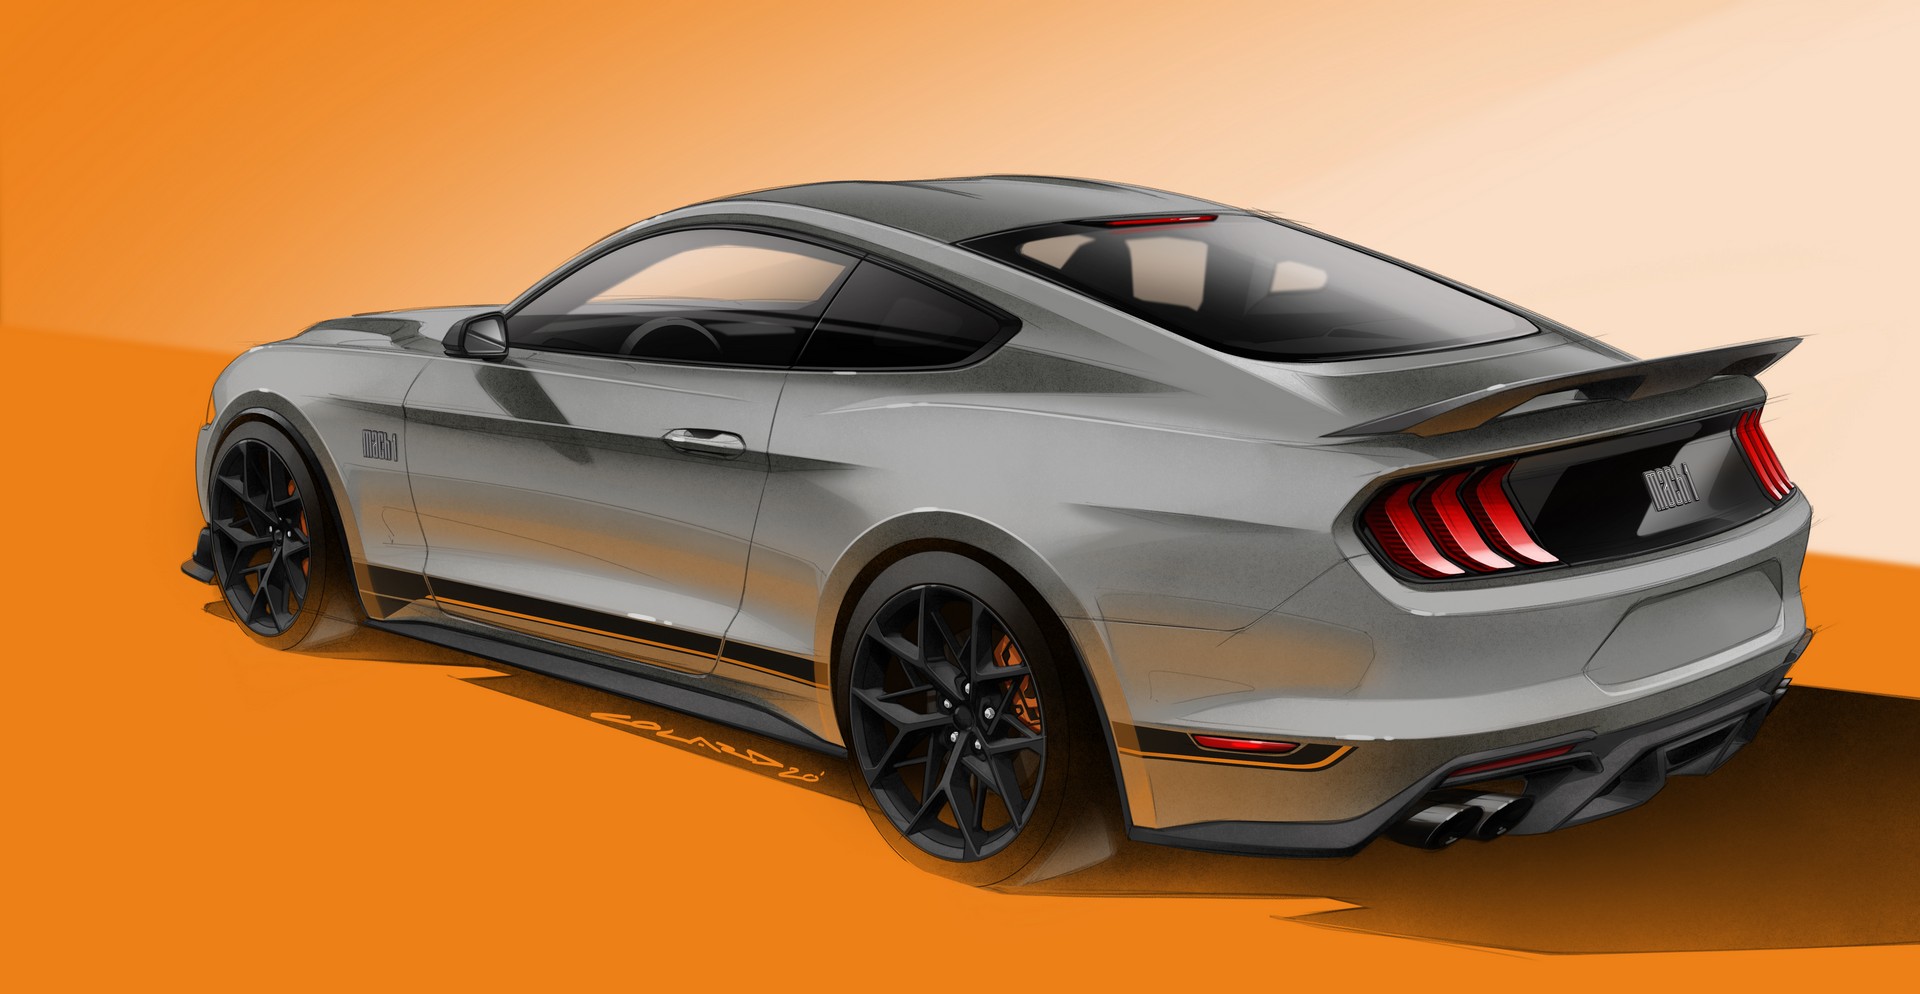 Ford Mustang Mach 1 sketch used for representation. 